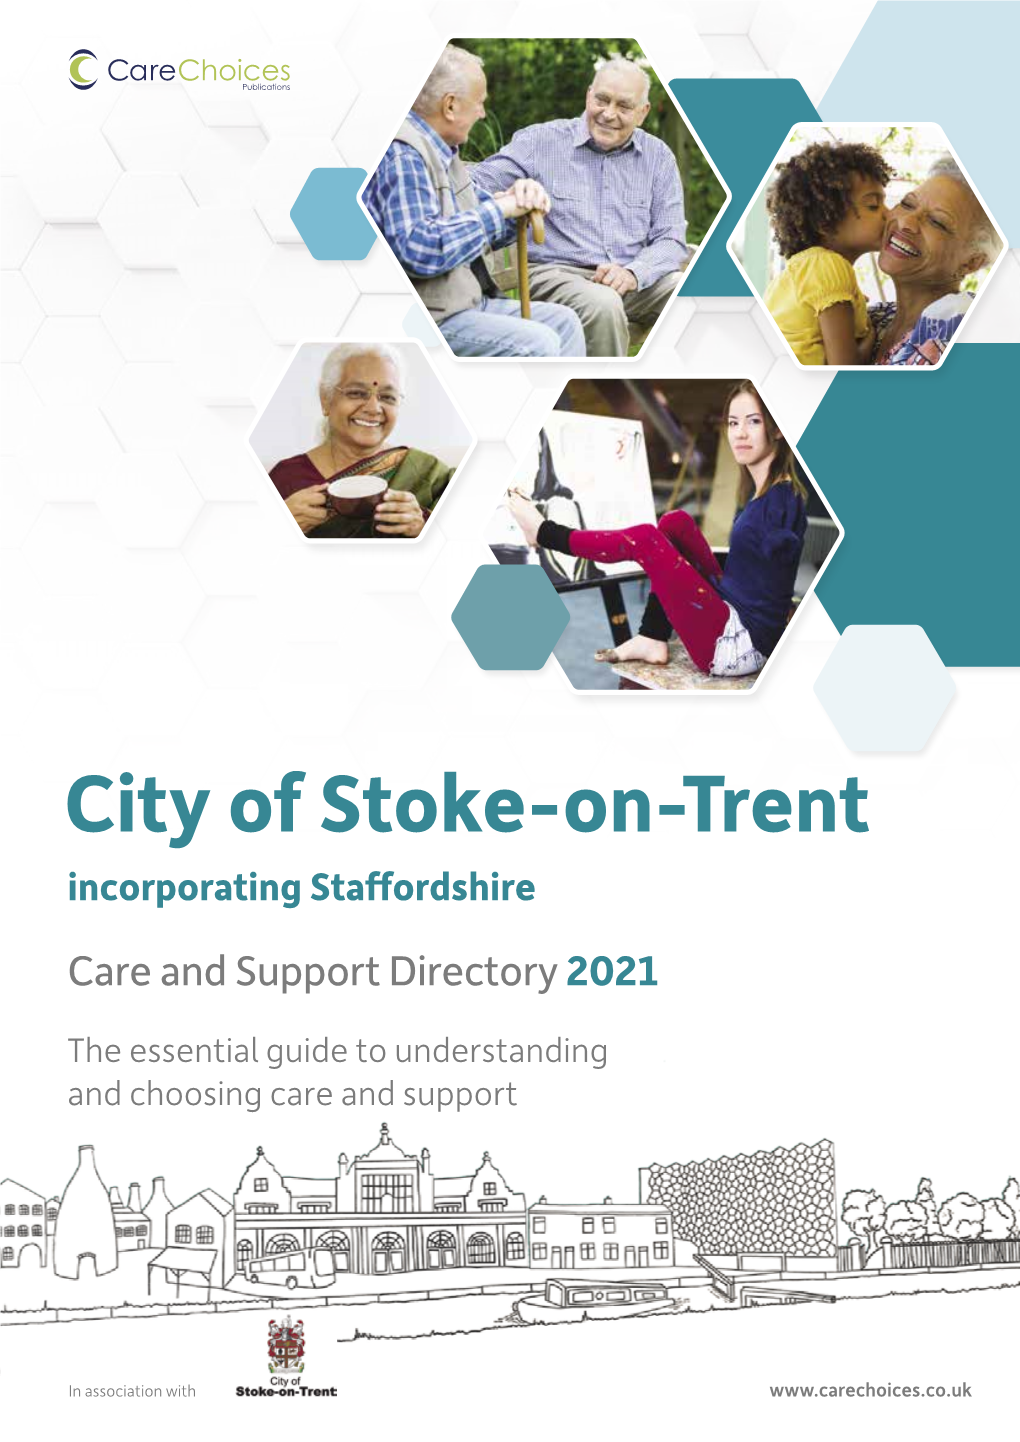 City of Stoke-On-Trent Incorporating Staffordshire Care and Support Directory 2021